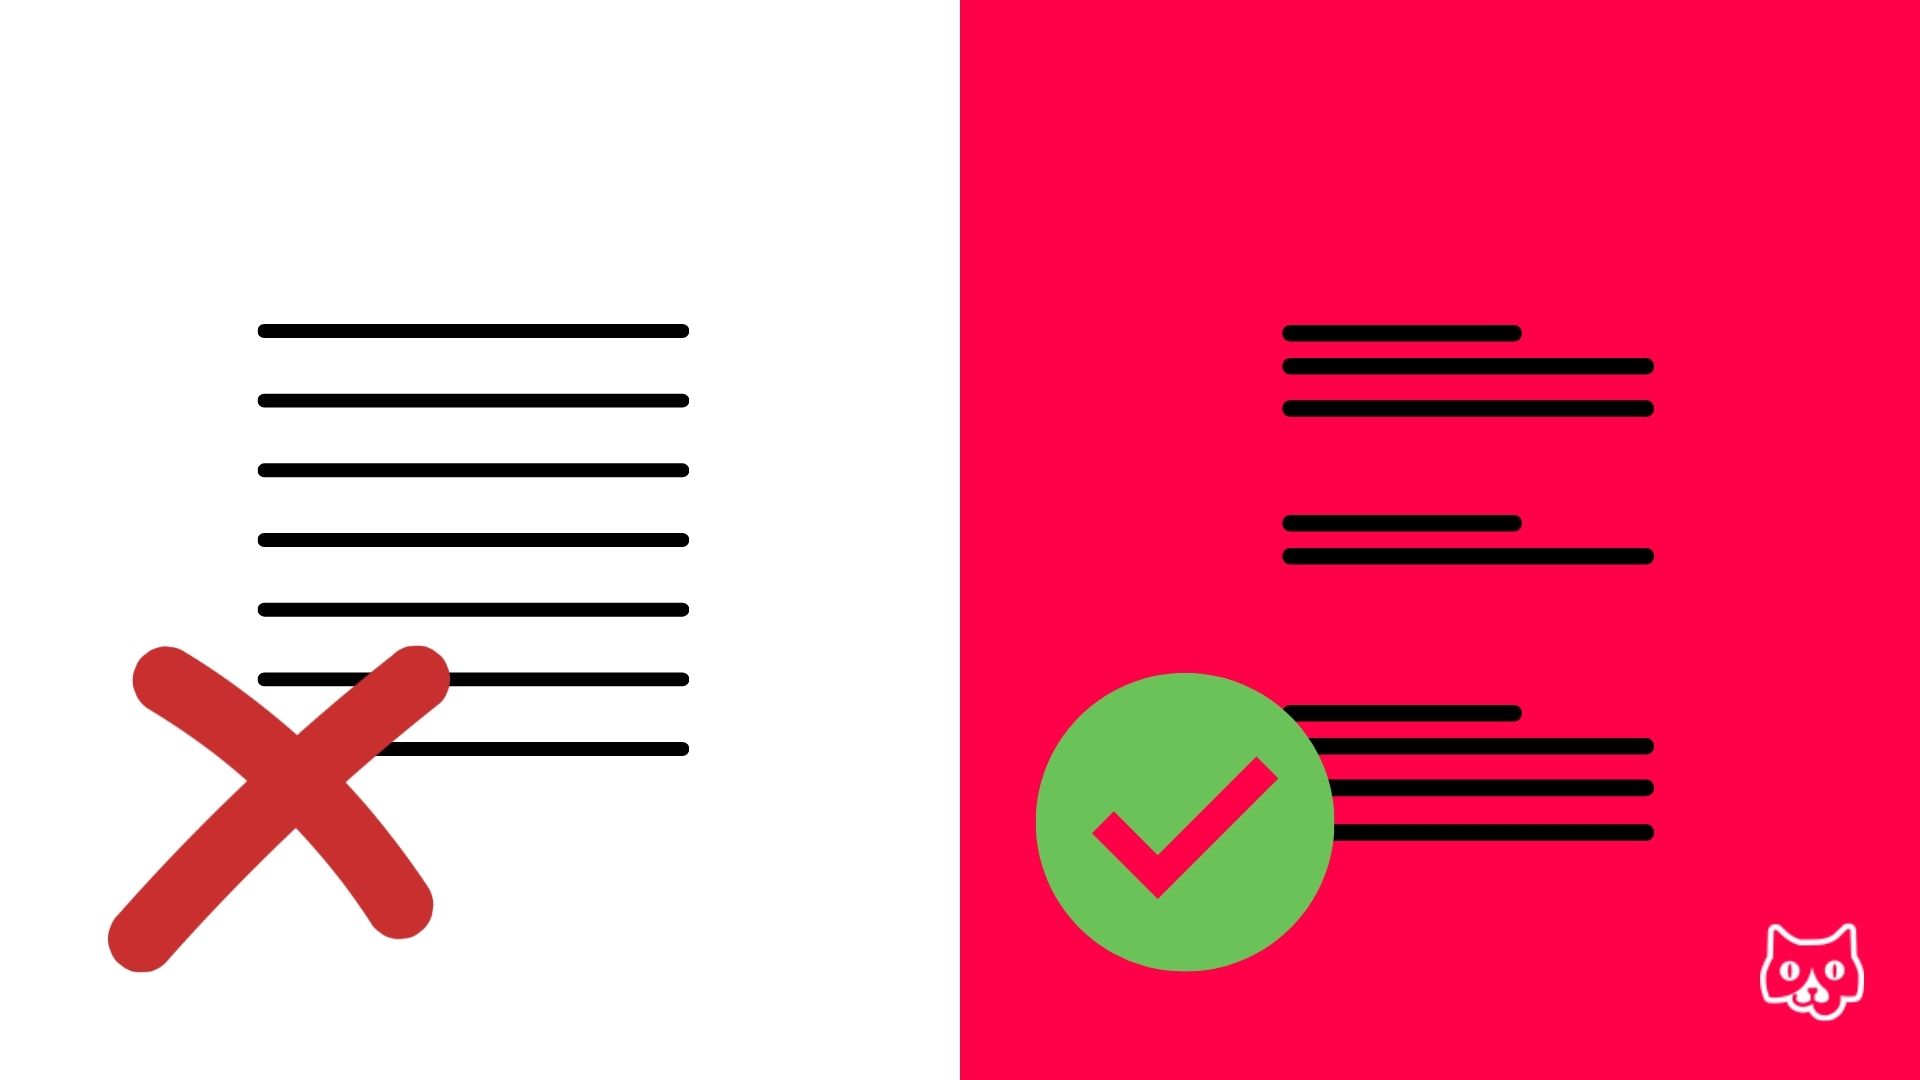 This image shows the difference visually between breaking up your content with keyword-rich headings versus just leaving a wall of text. The left shows a block of lines representing text without any space between on a white background: there is an X underneath it. On the right on a red background, there are also lines to represent text, but there is space between them and shorter lines above each 'paragraph' to indicate the headings. There is a check next to this set of lines. 